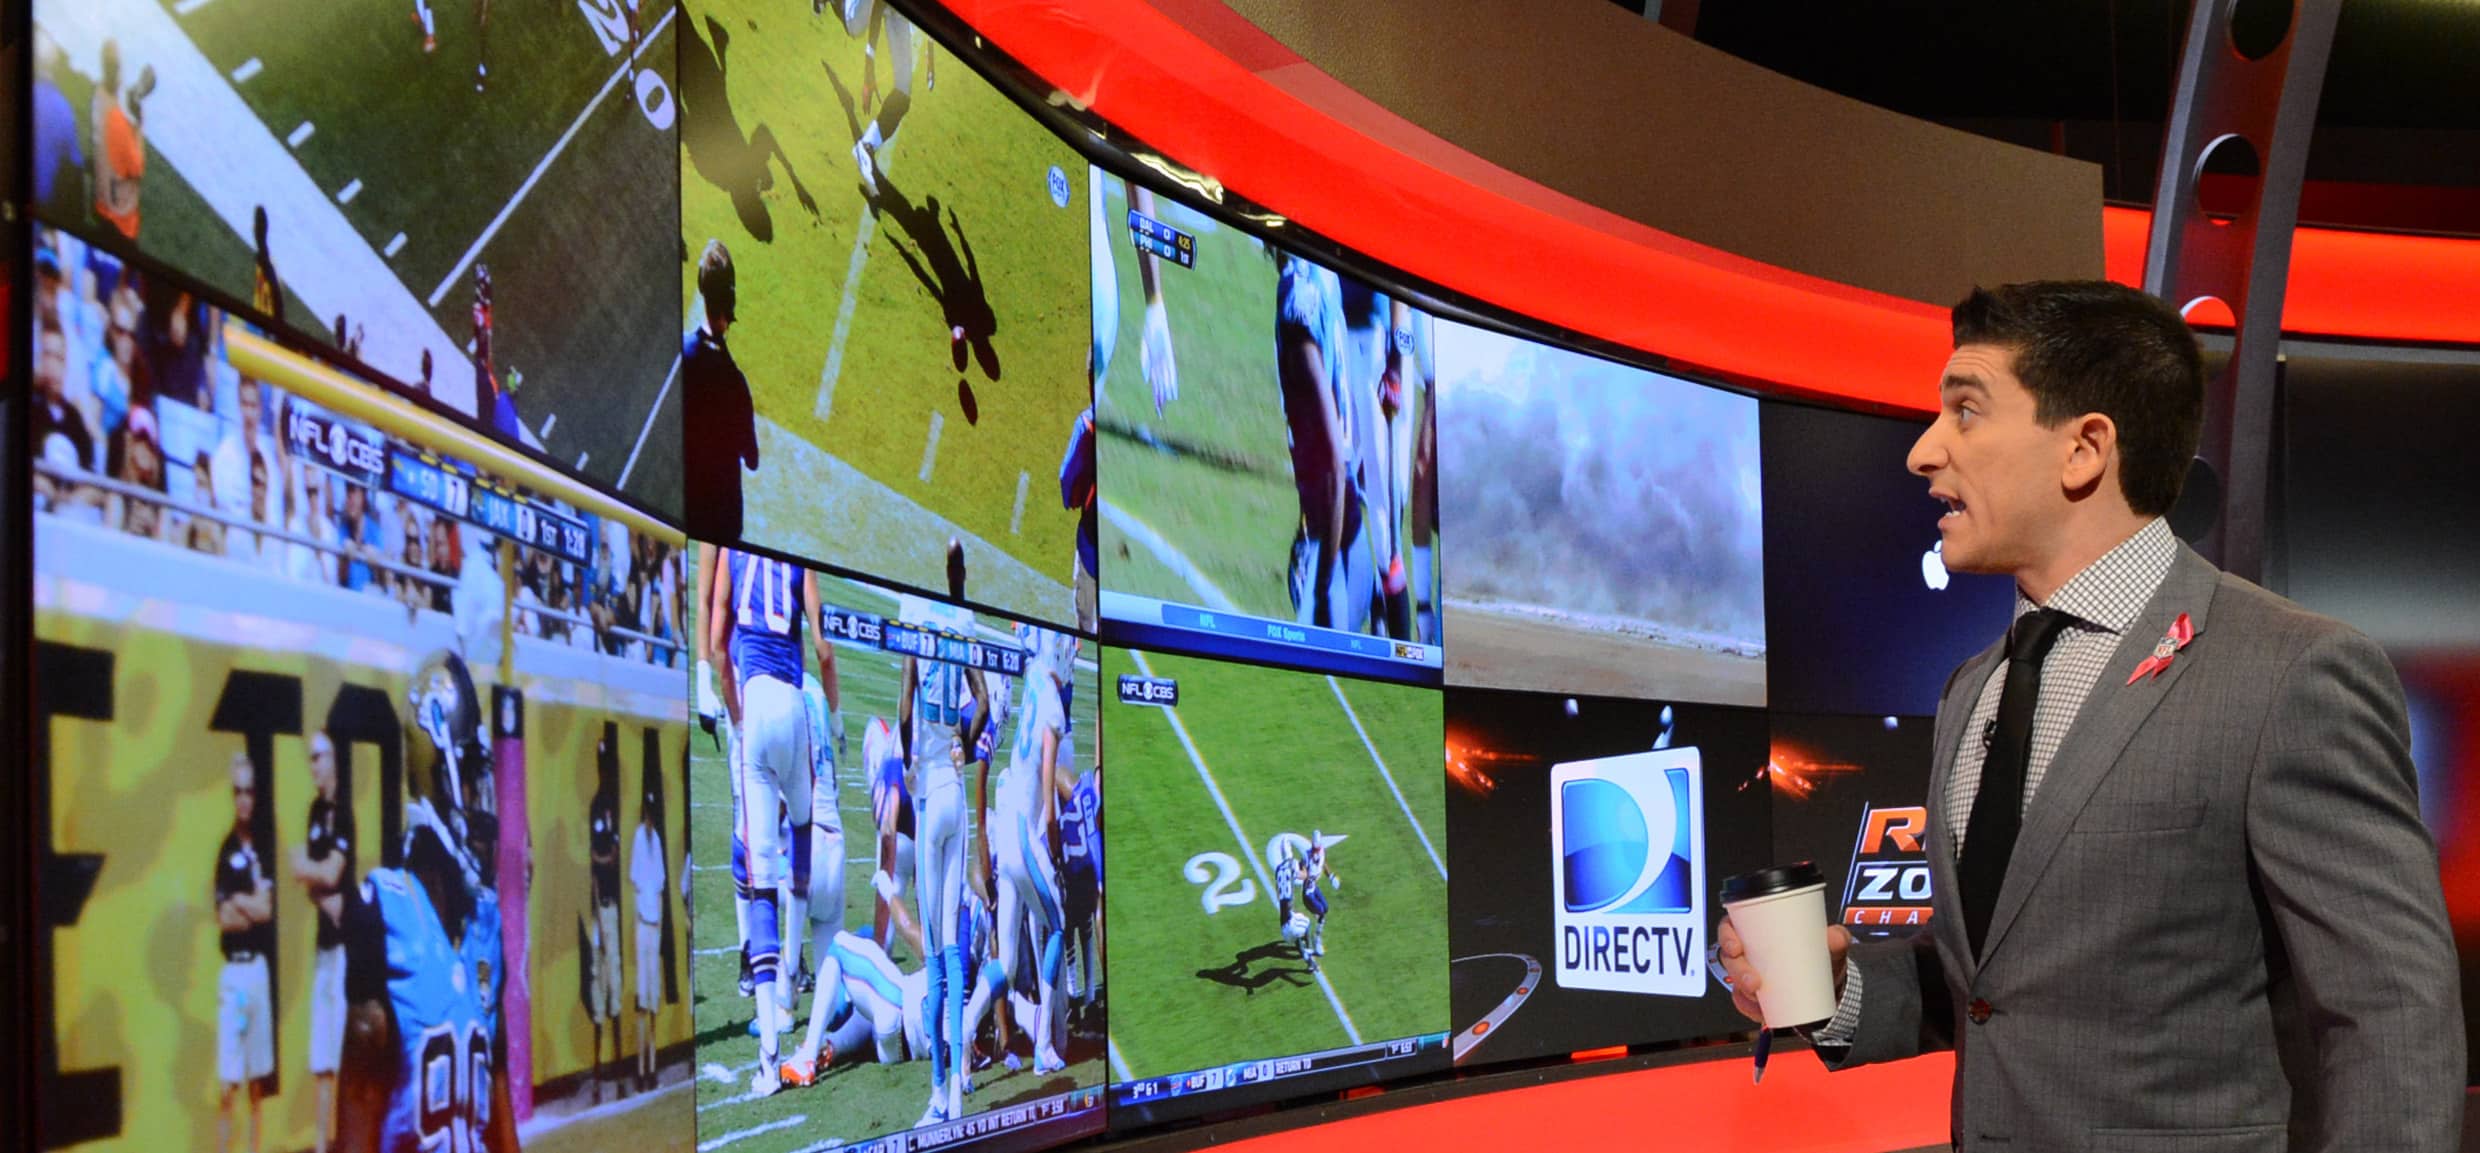 DirecTV’s Red Zone Channel Going Away Next Season